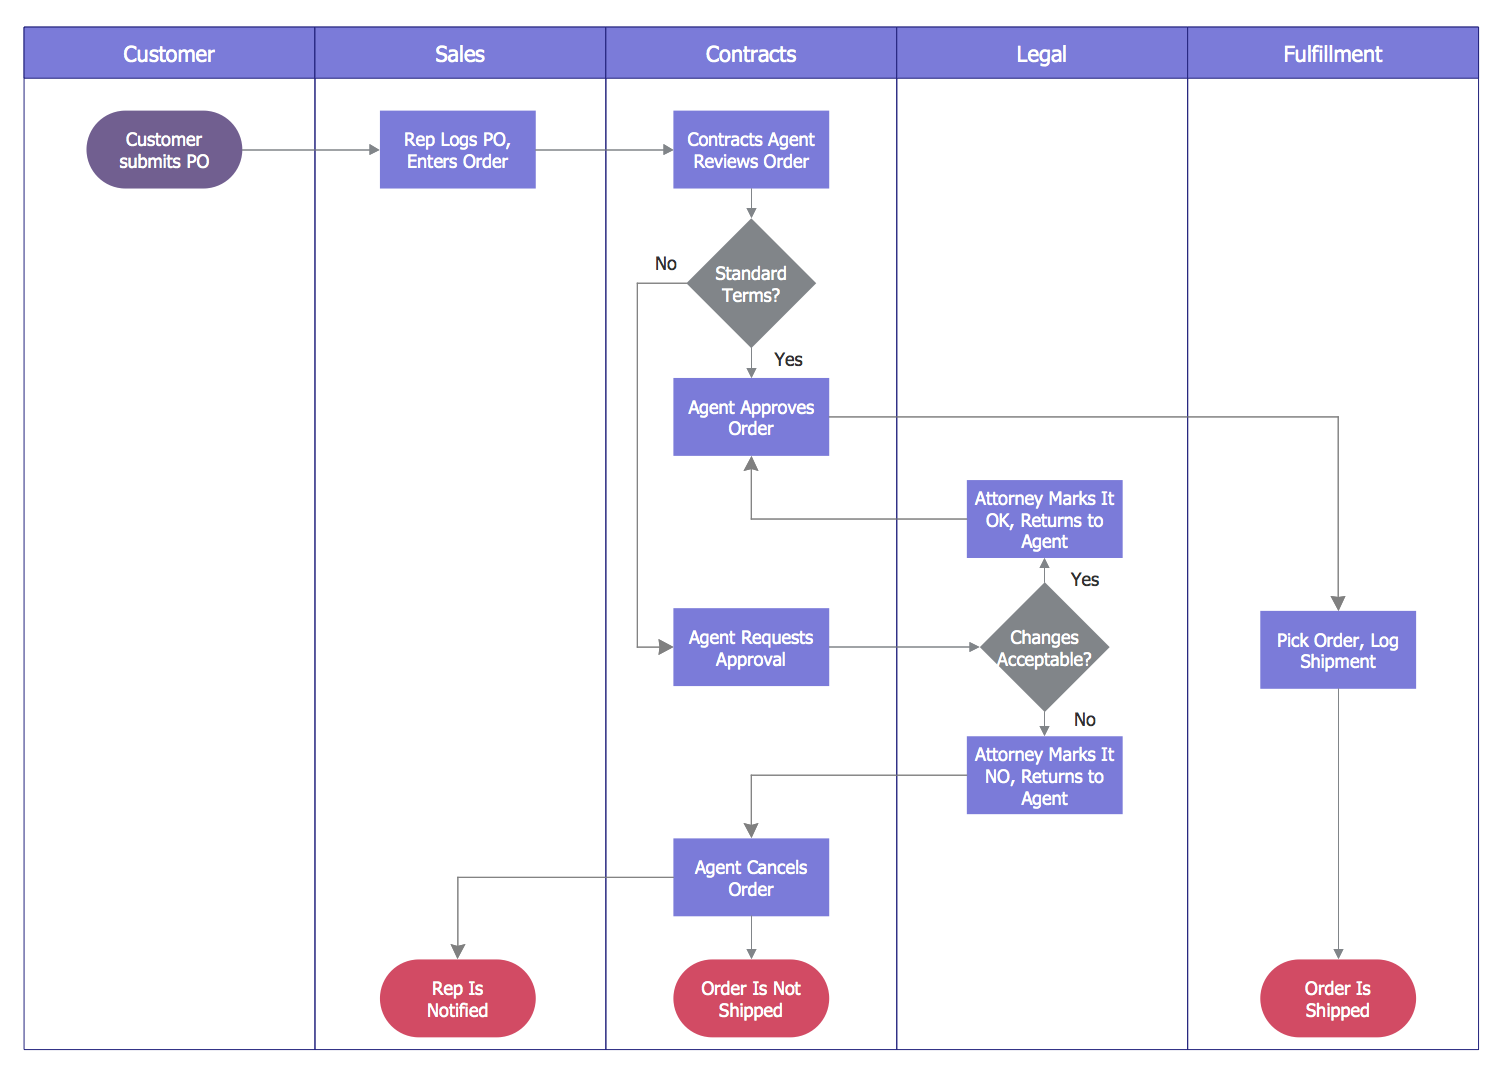 business process model diagram examples